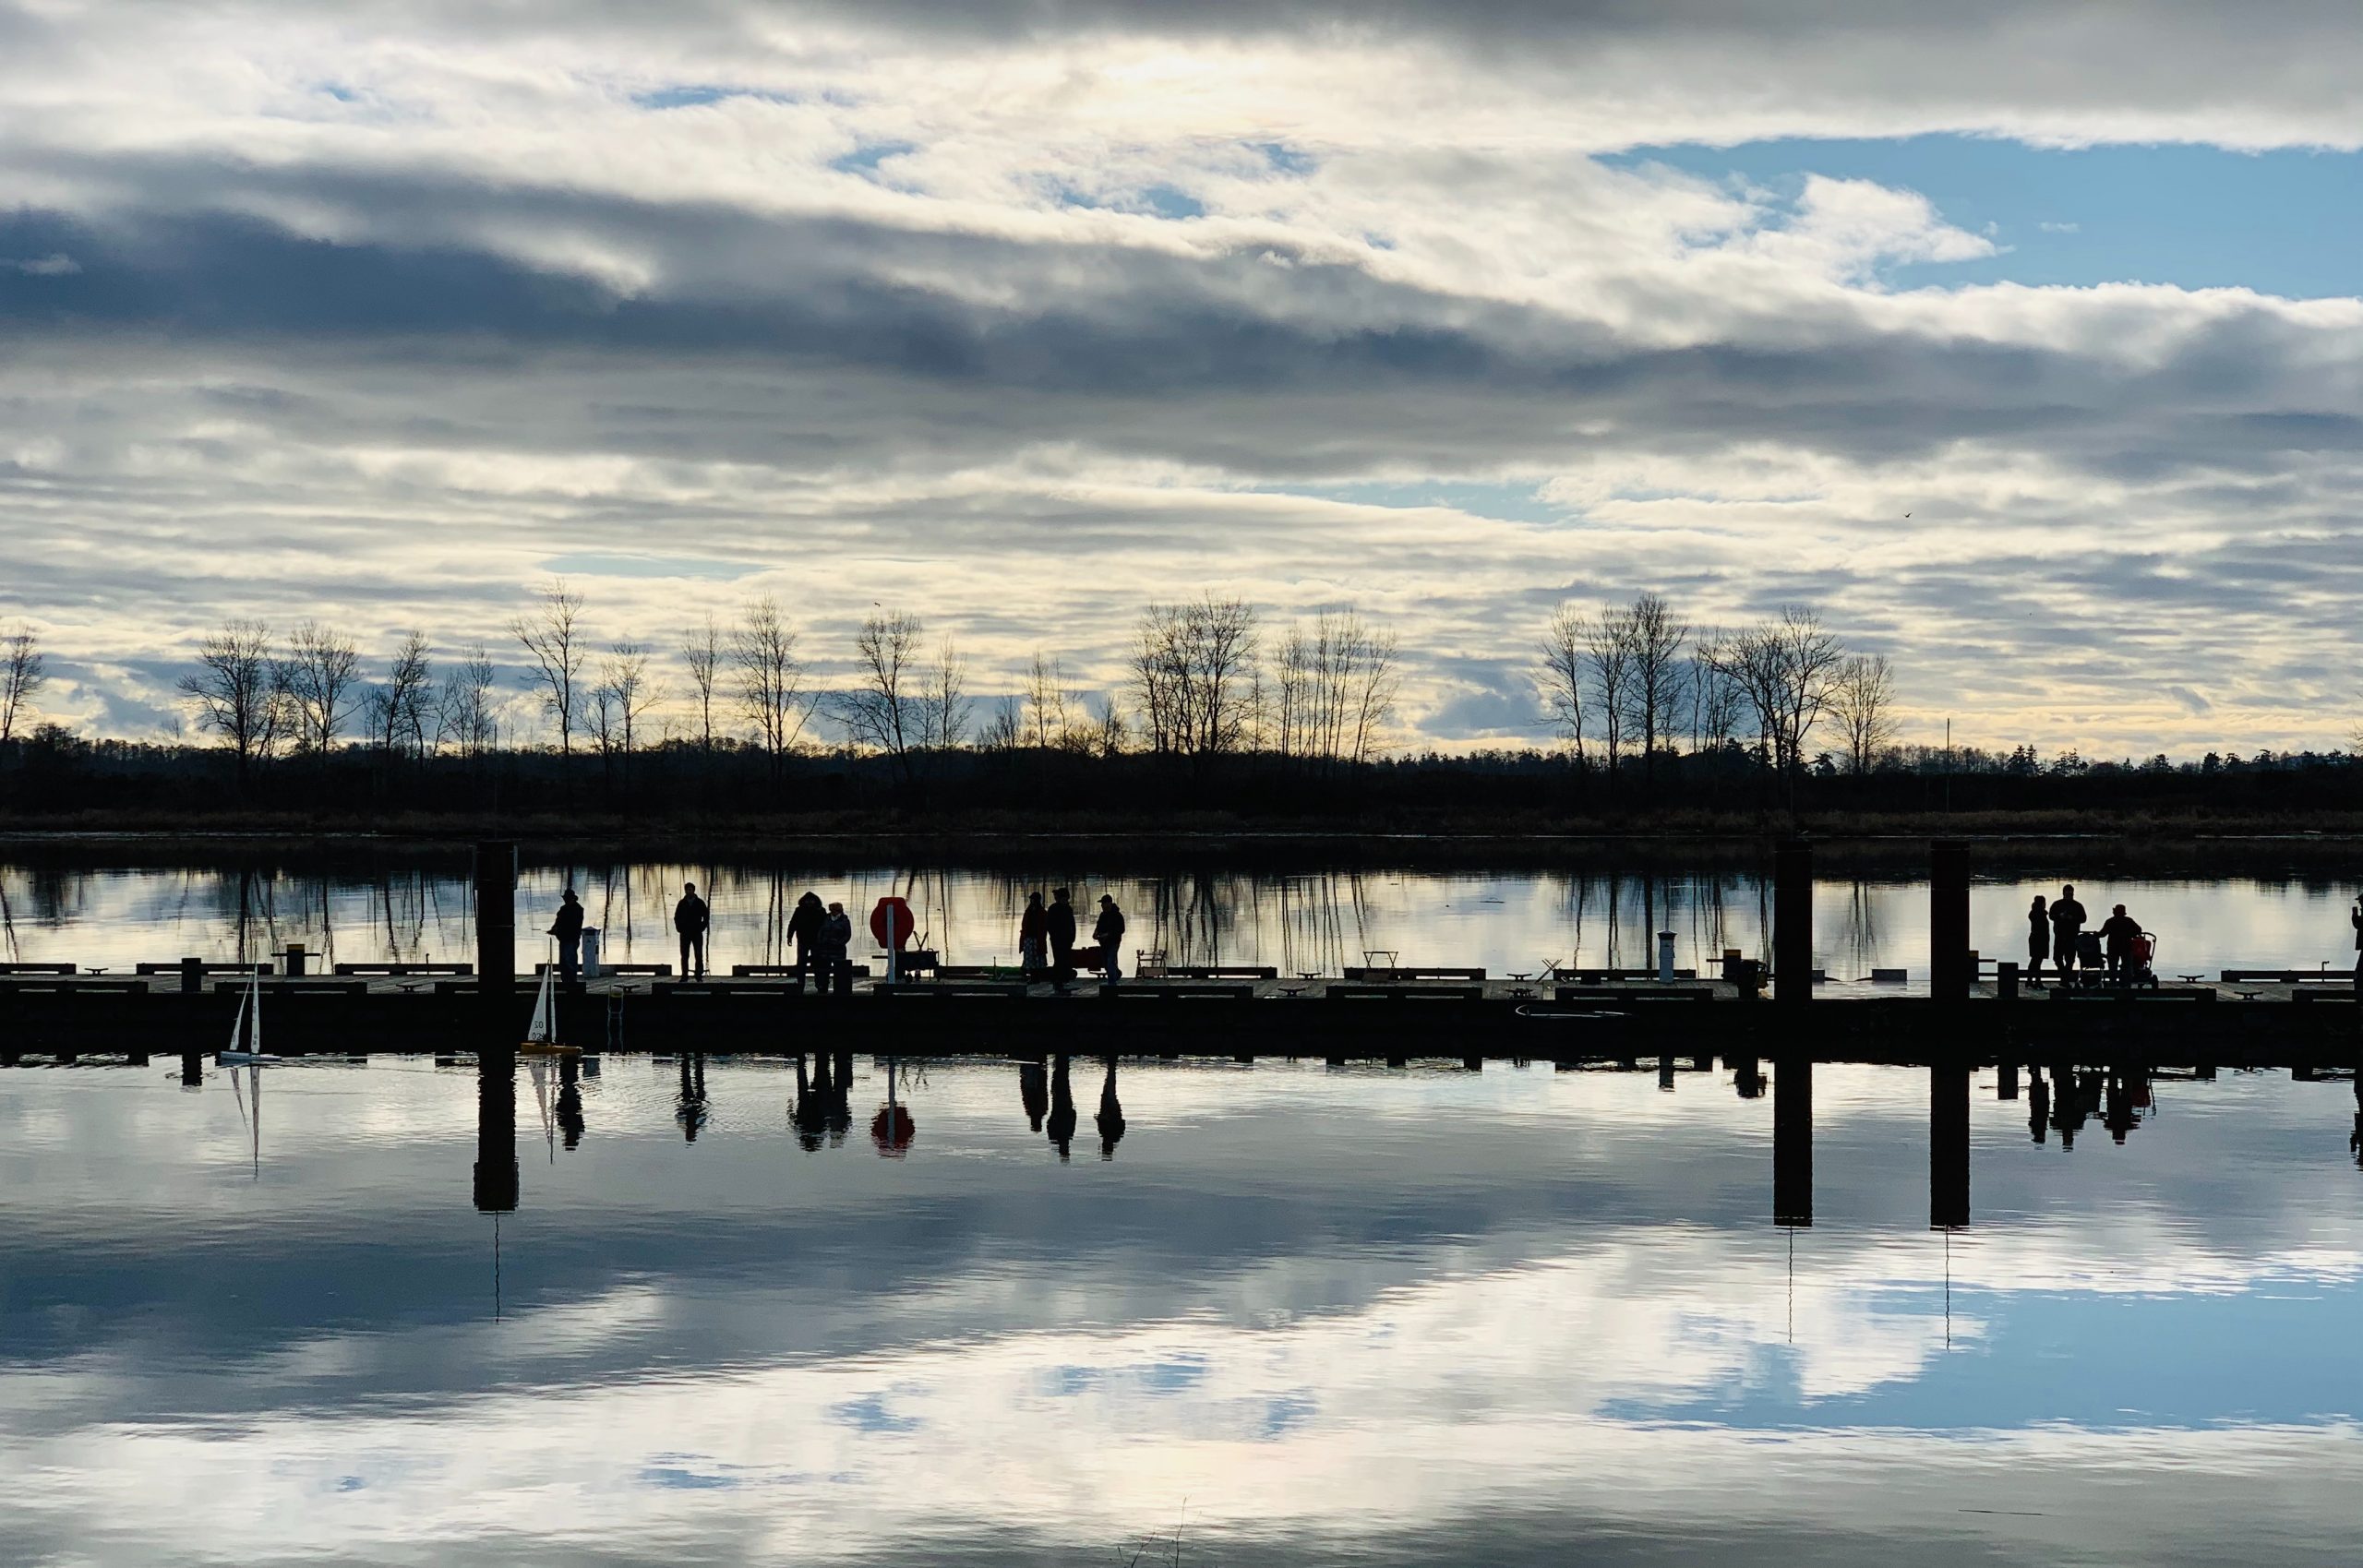 People fishing off the pier on the Fraser River in present-day Steveston (Musqueam territory).